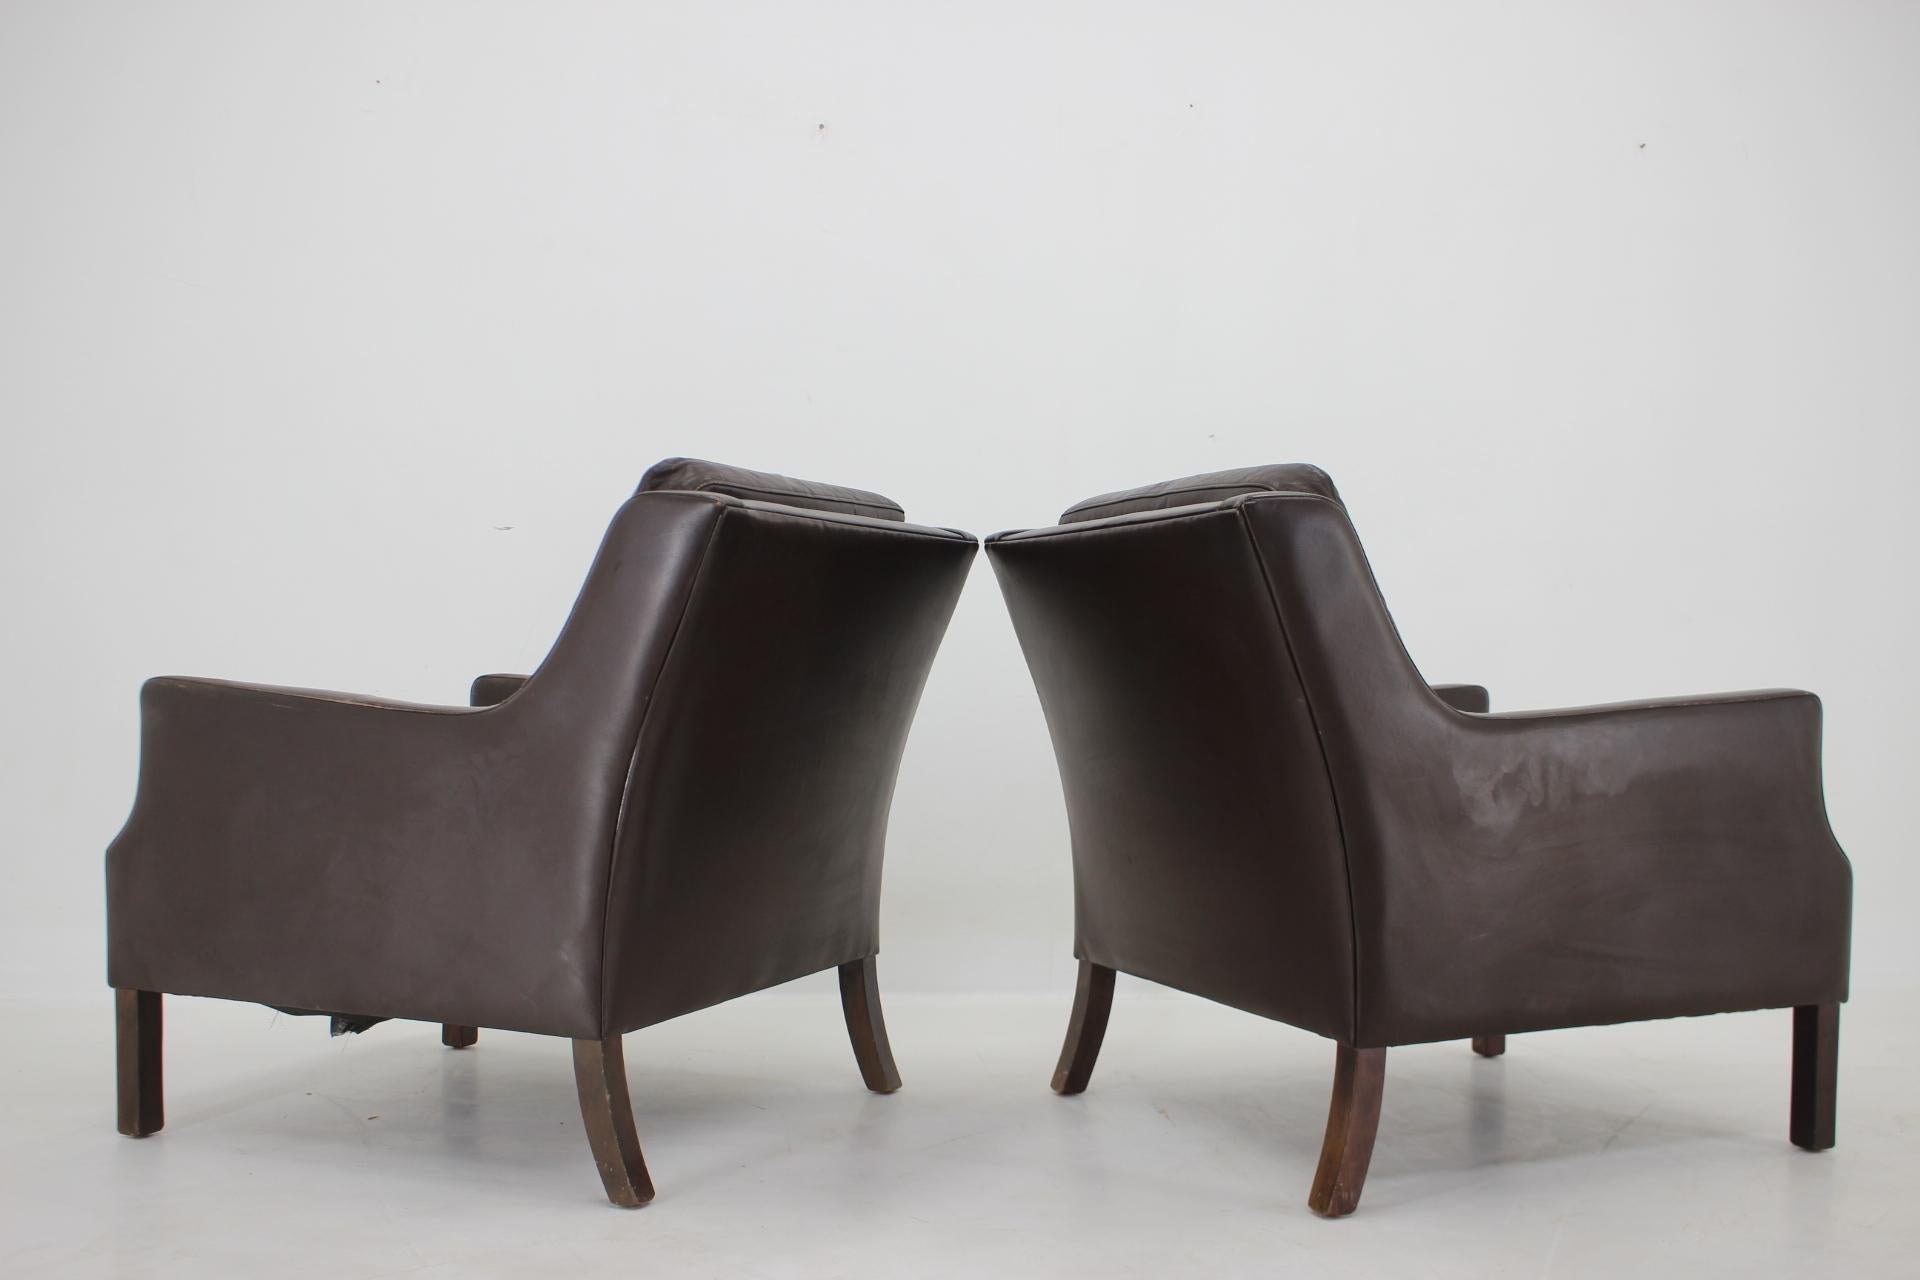 1970s Pair of Leather Armchairs, Denmark For Sale 2